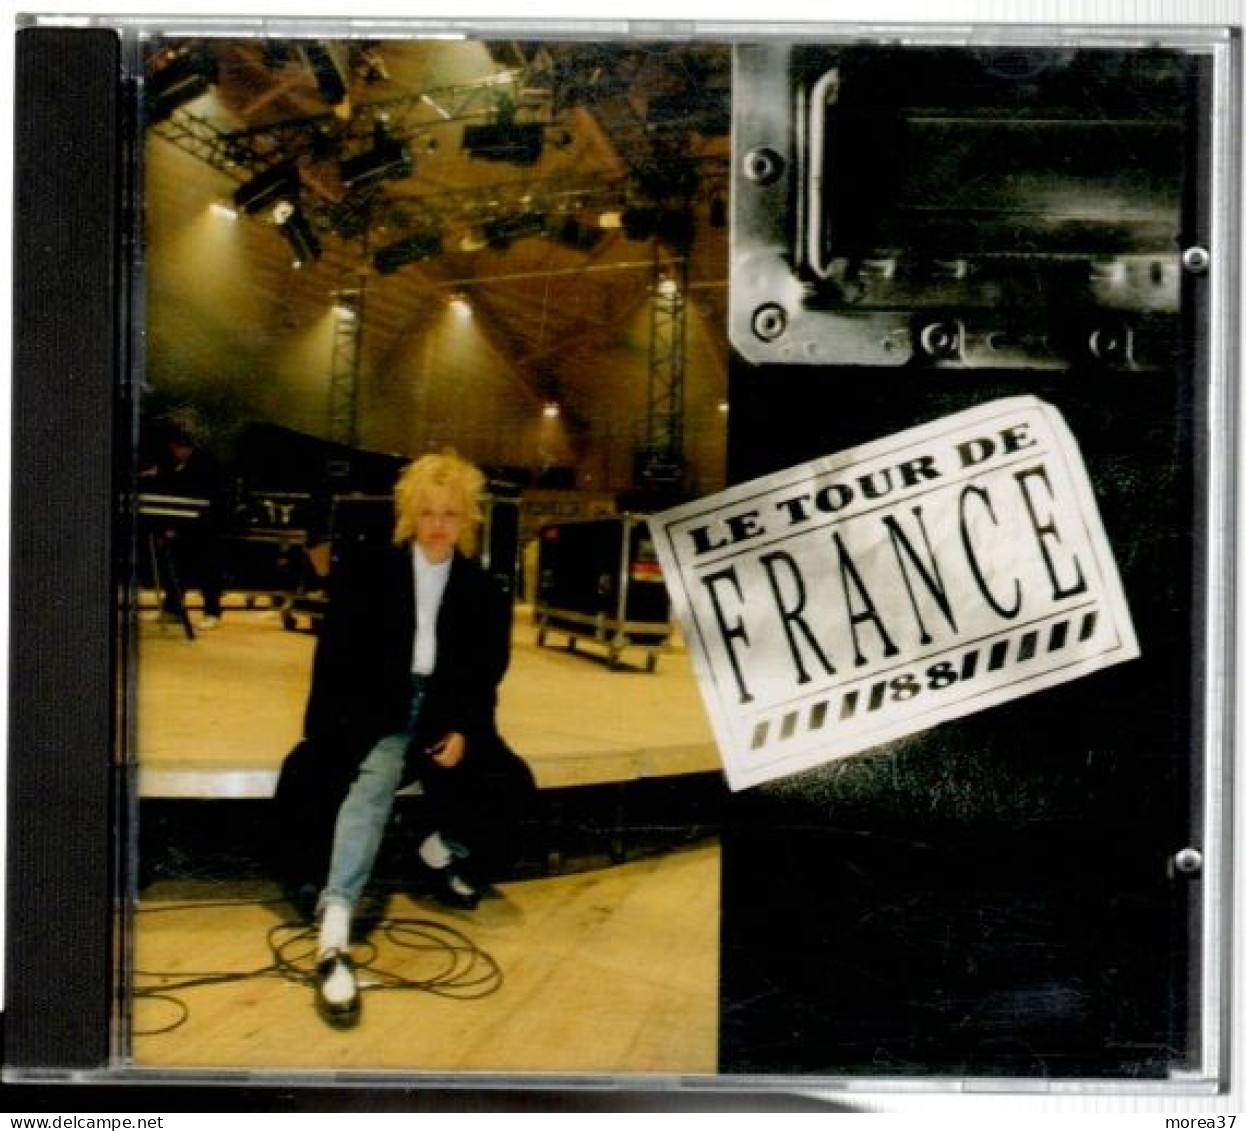 FRANCE GALL Le Tour De France 88   (C02) - Other - French Music